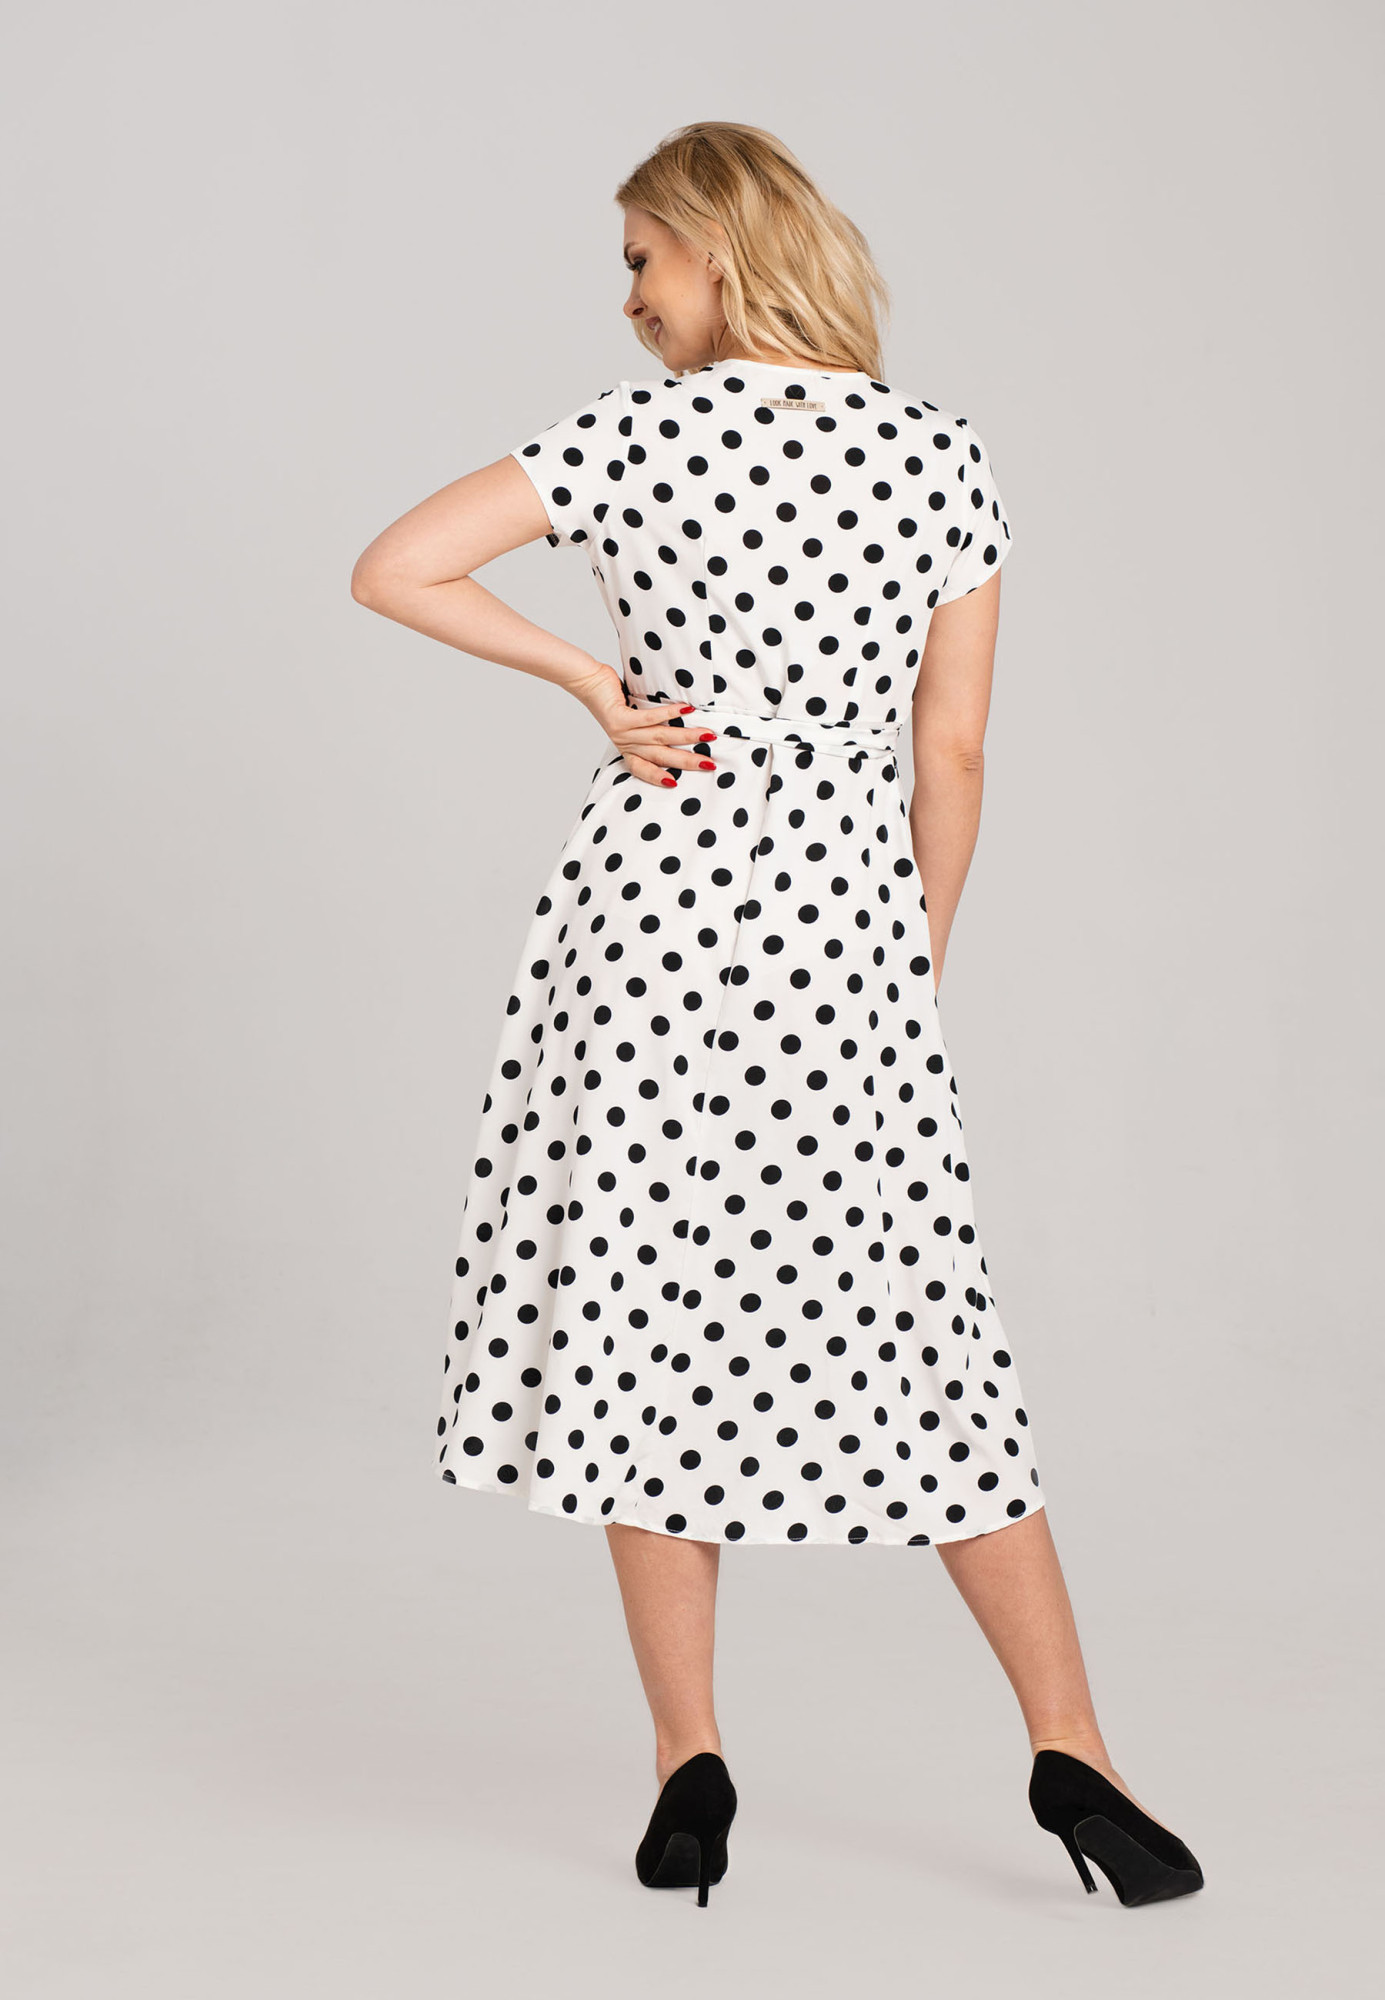 Look Made With Love Šaty N20 Polka Dots Black/White M